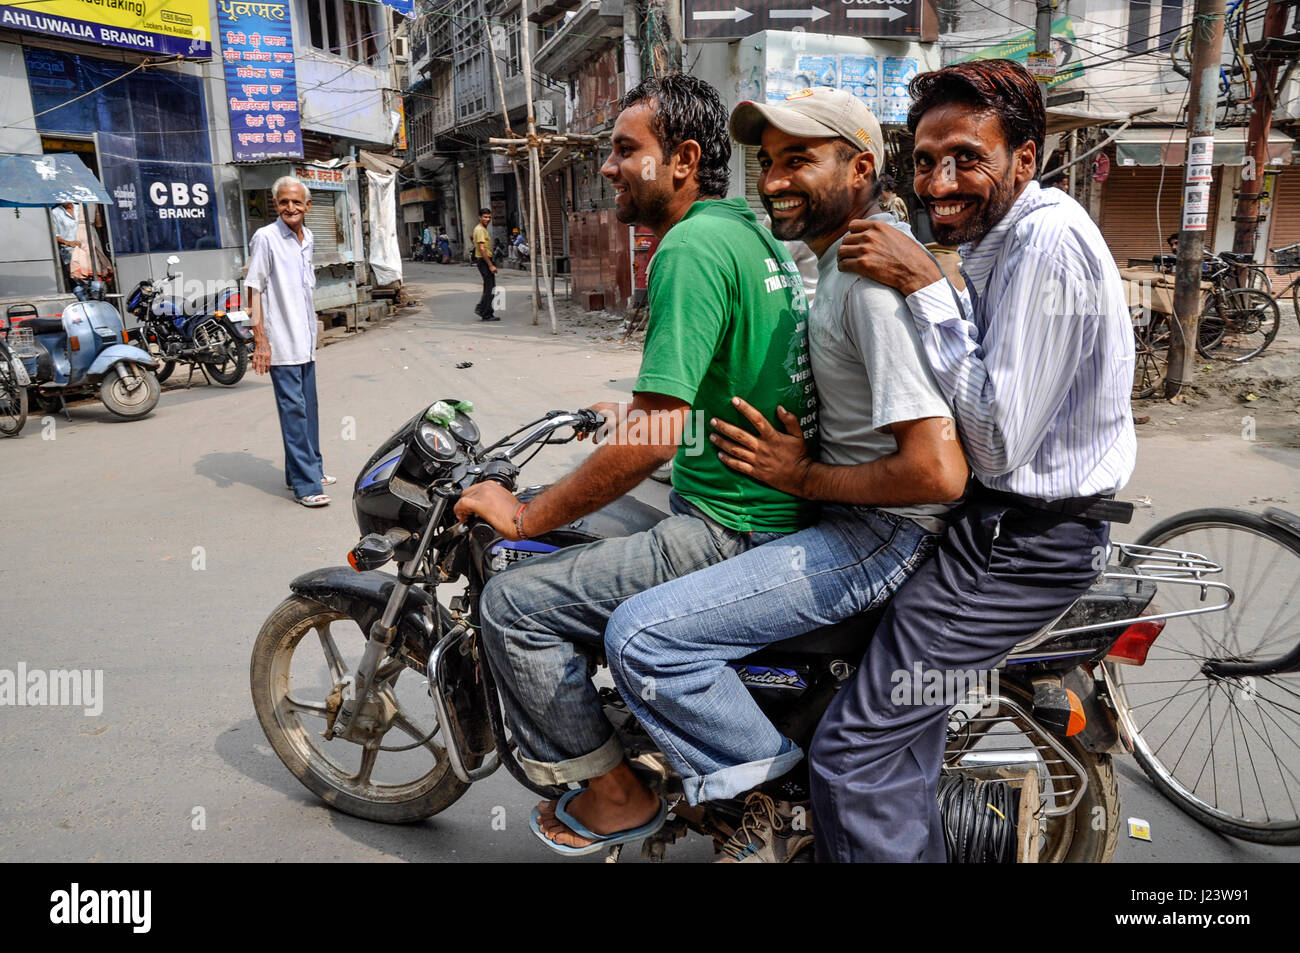 Amritsar, India, september 4, 2010: Young men on a motorcykle, smiling, India. Stock Photo